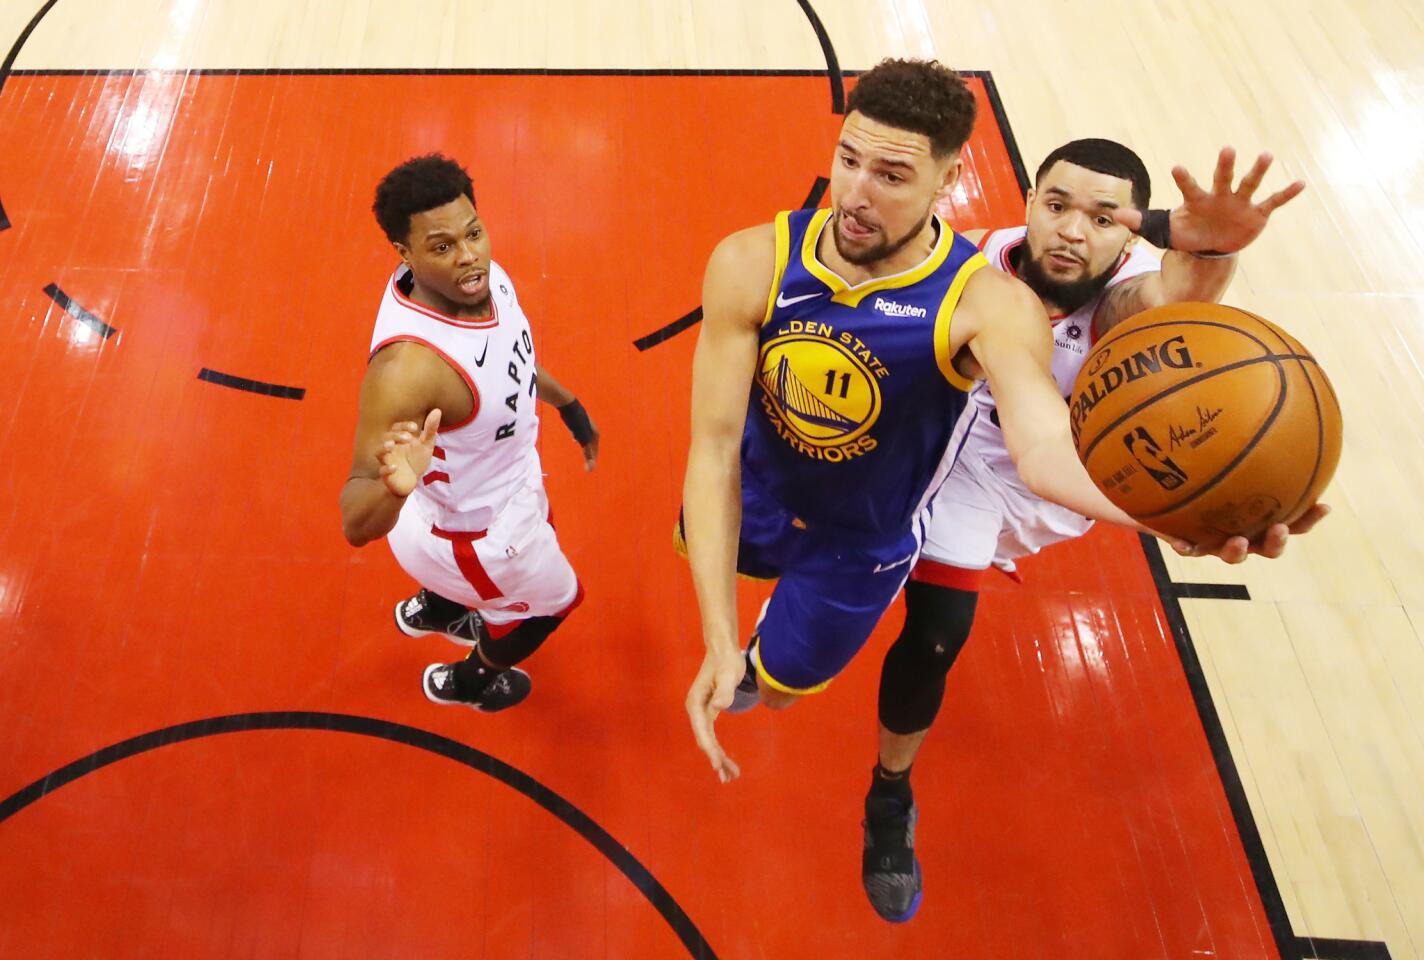 TORONTO, ONTARIO - JUNE 02: Klay Thompson #11 of the Golden State Warriors attempts a shot against Fred VanVleet #23 of the Toronto Raptors during Game Two of the 2019 NBA Finals at Scotiabank Arena on June 02, 2019 in Toronto, Canada. NOTE TO USER: User expressly acknowledges and agrees that, by downloading and or using this photograph, User is consenting to the terms and conditions of the Getty Images License Agreement. (Photo by Kyle Terada - Pool/Getty Images) ** OUTS - ELSENT, FPG, CM - OUTS * NM, PH, VA if sourced by CT, LA or MoD **